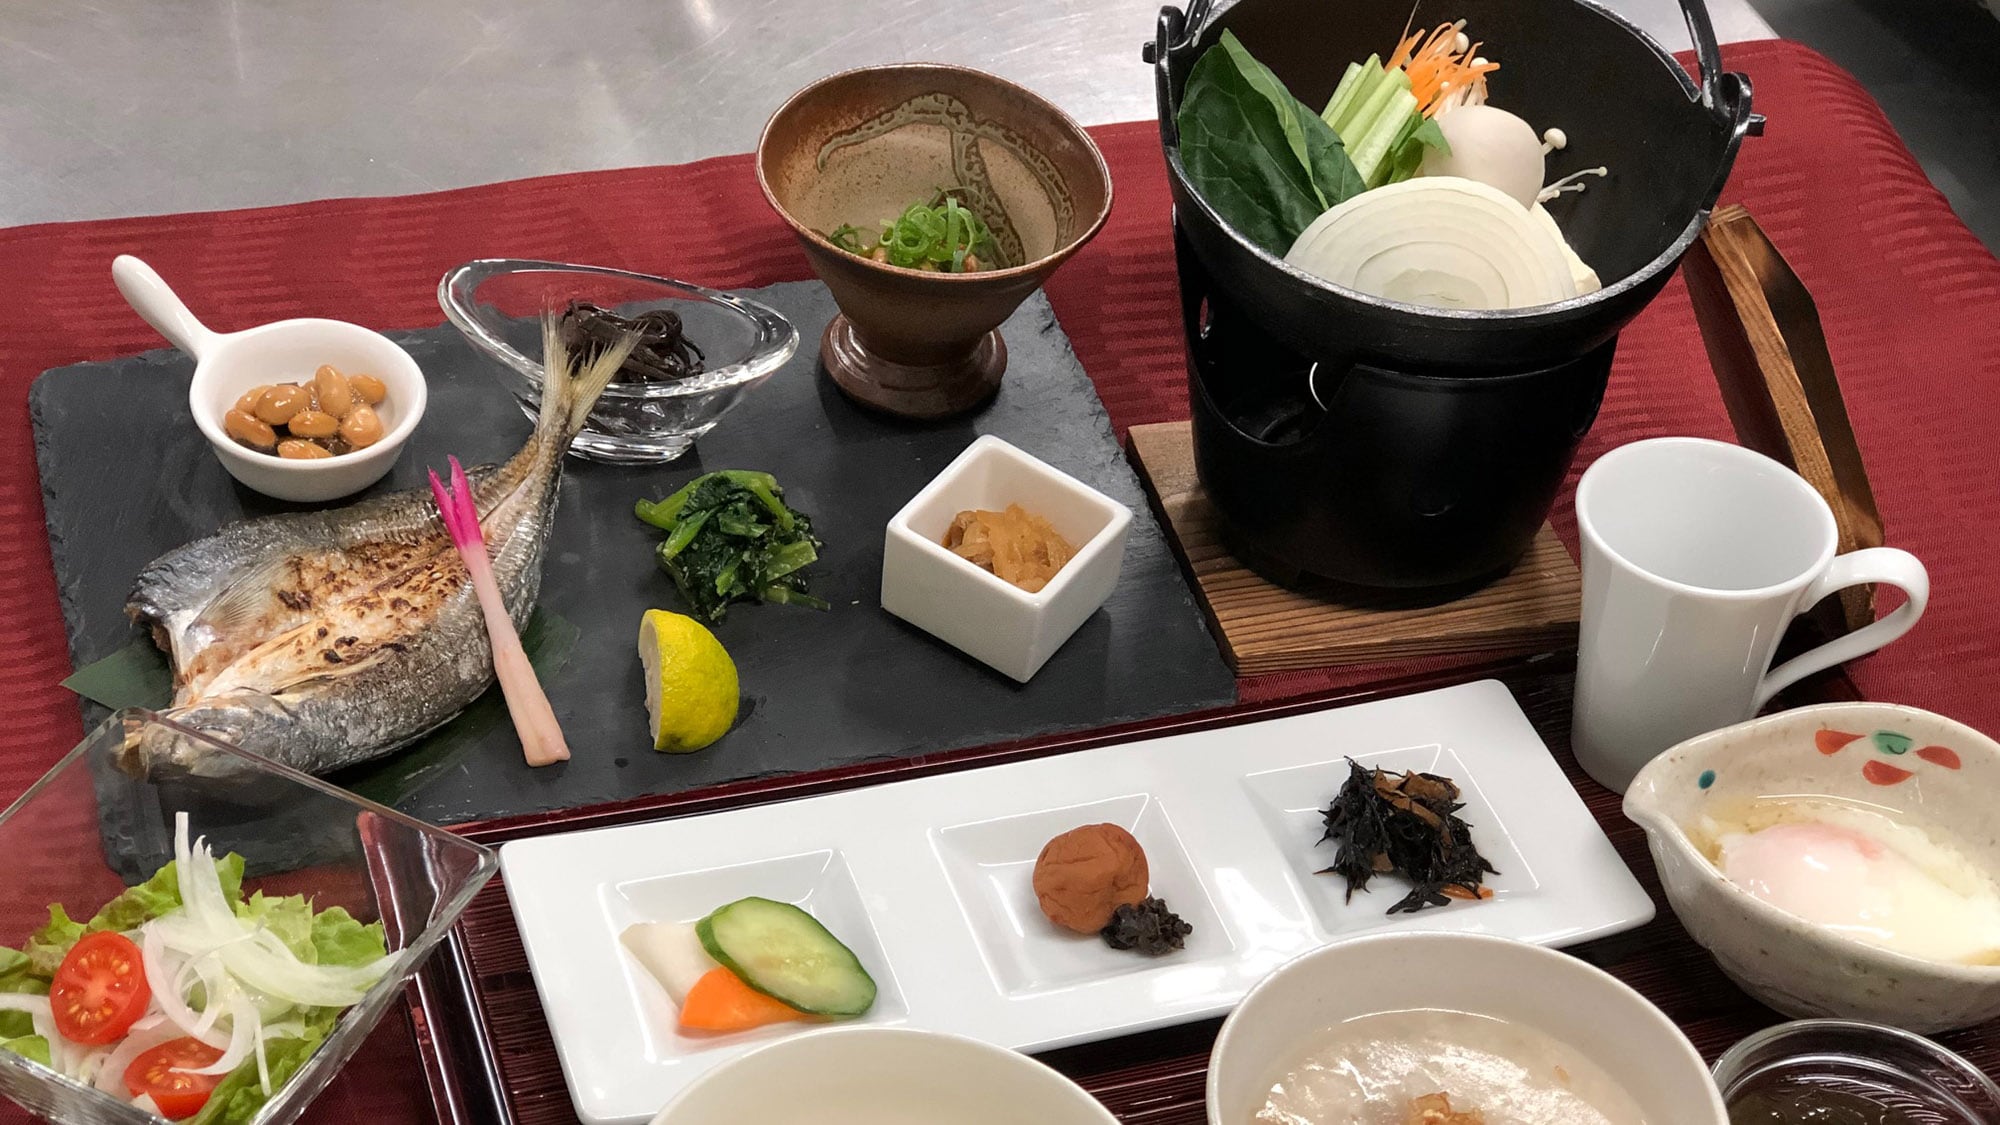 ・[Meals] A delicious and healthy Japanese breakfast with plenty of vegetables